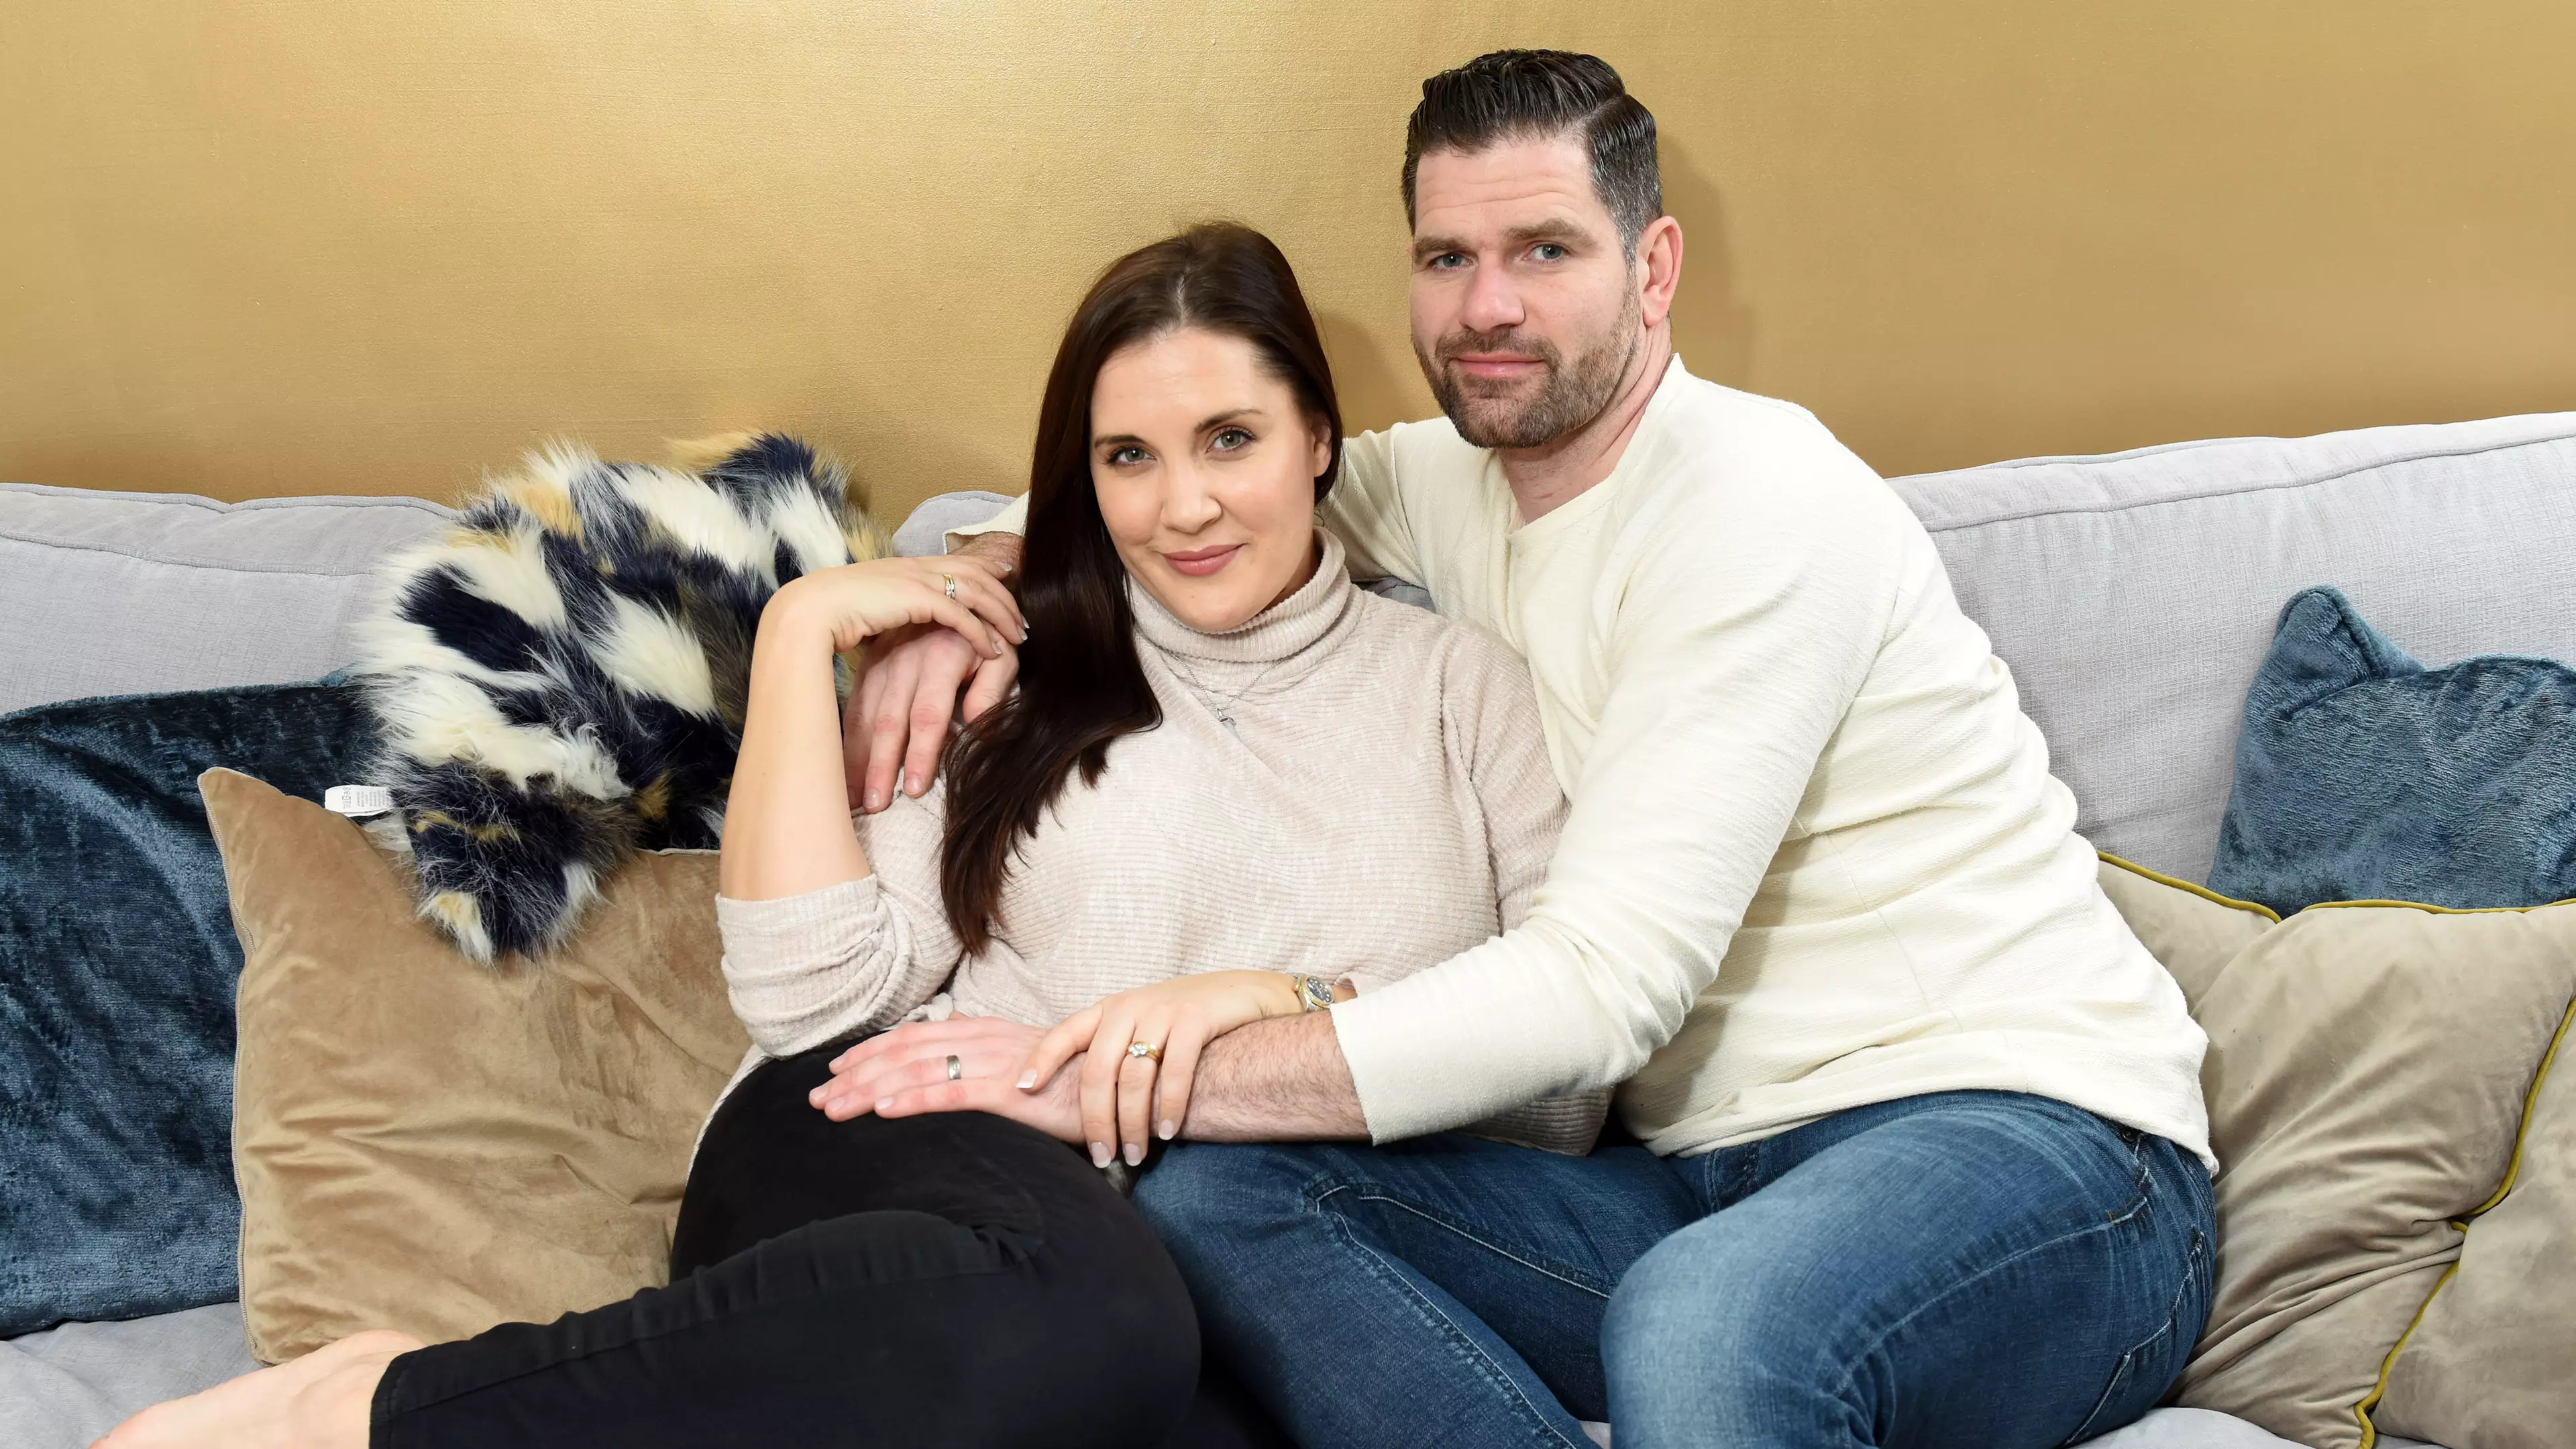 ​Childhood Sweethearts Plan On Remarrying Every Decade As They're So In Love